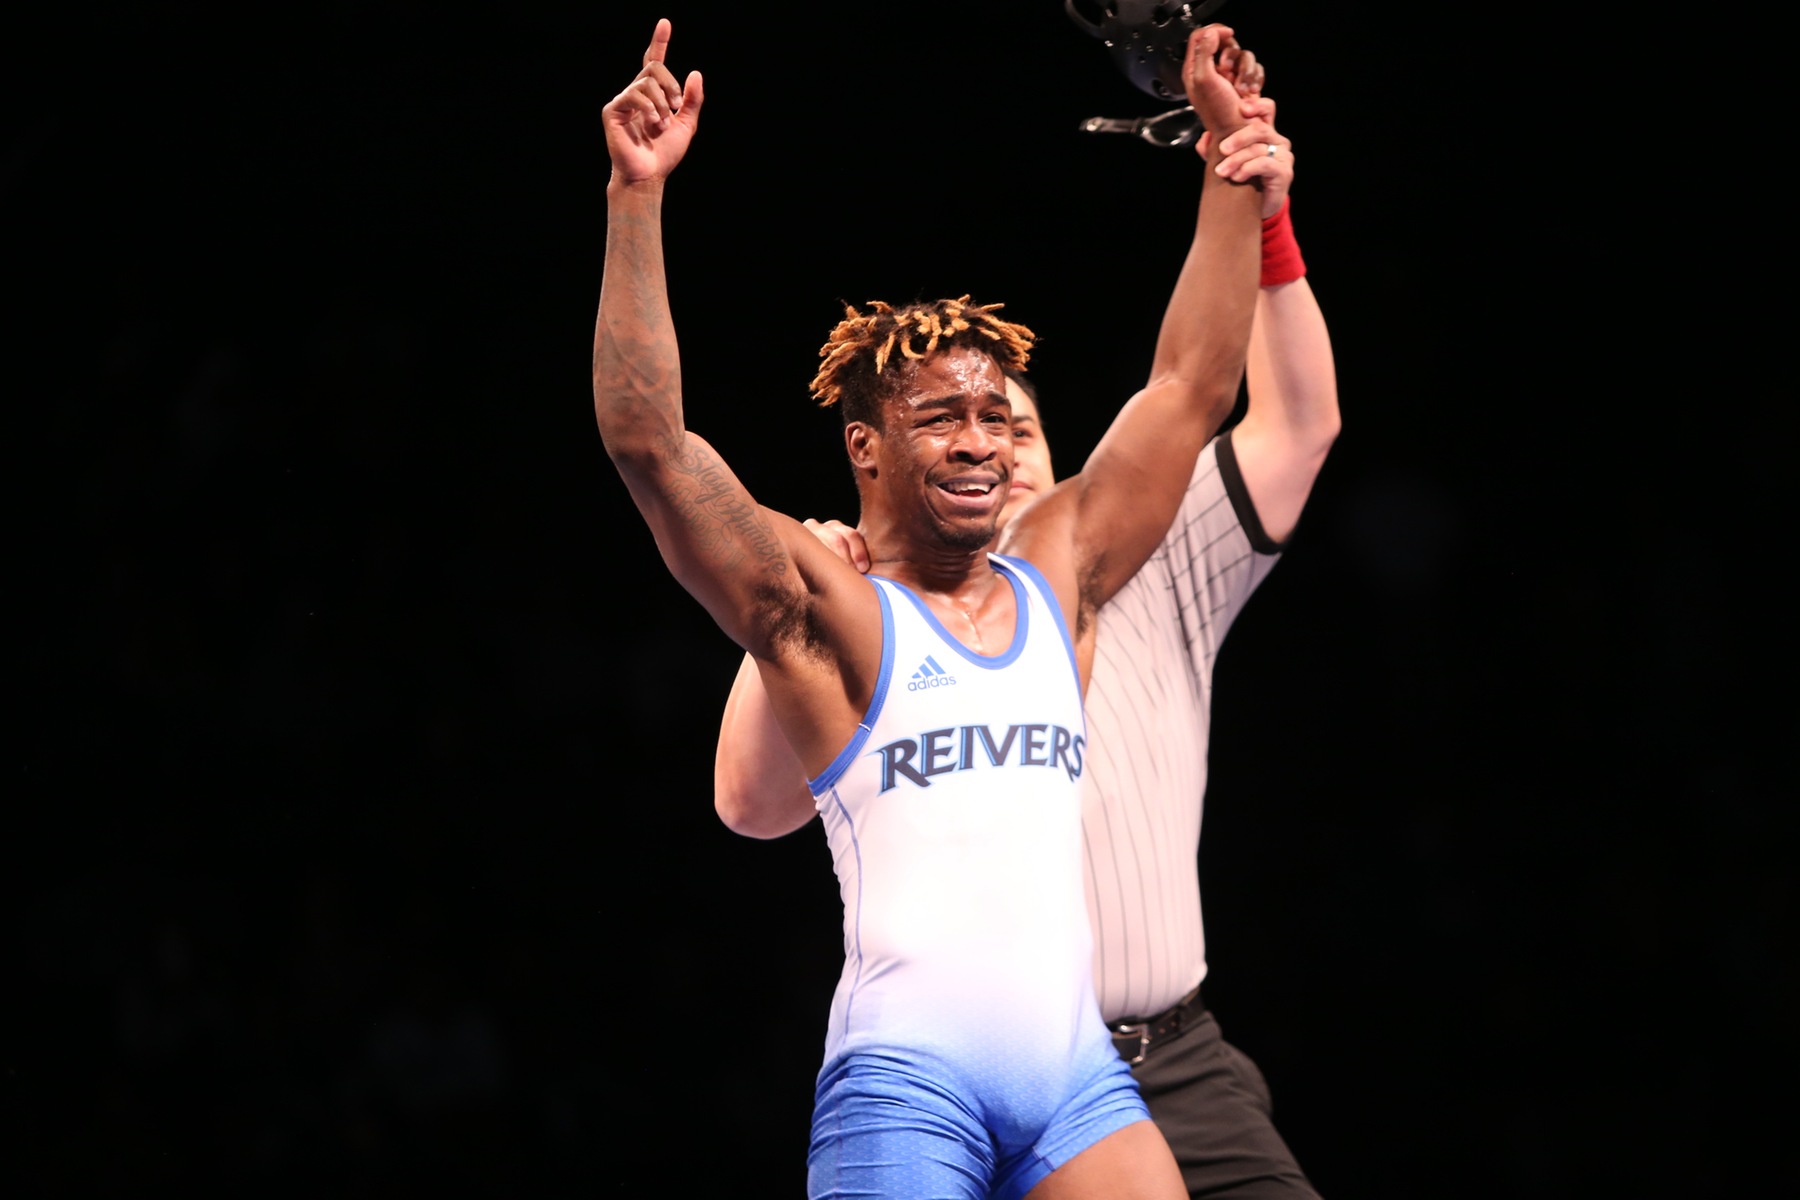 Nationals: Reivers Finish 3rd, Crosby Gets Gold